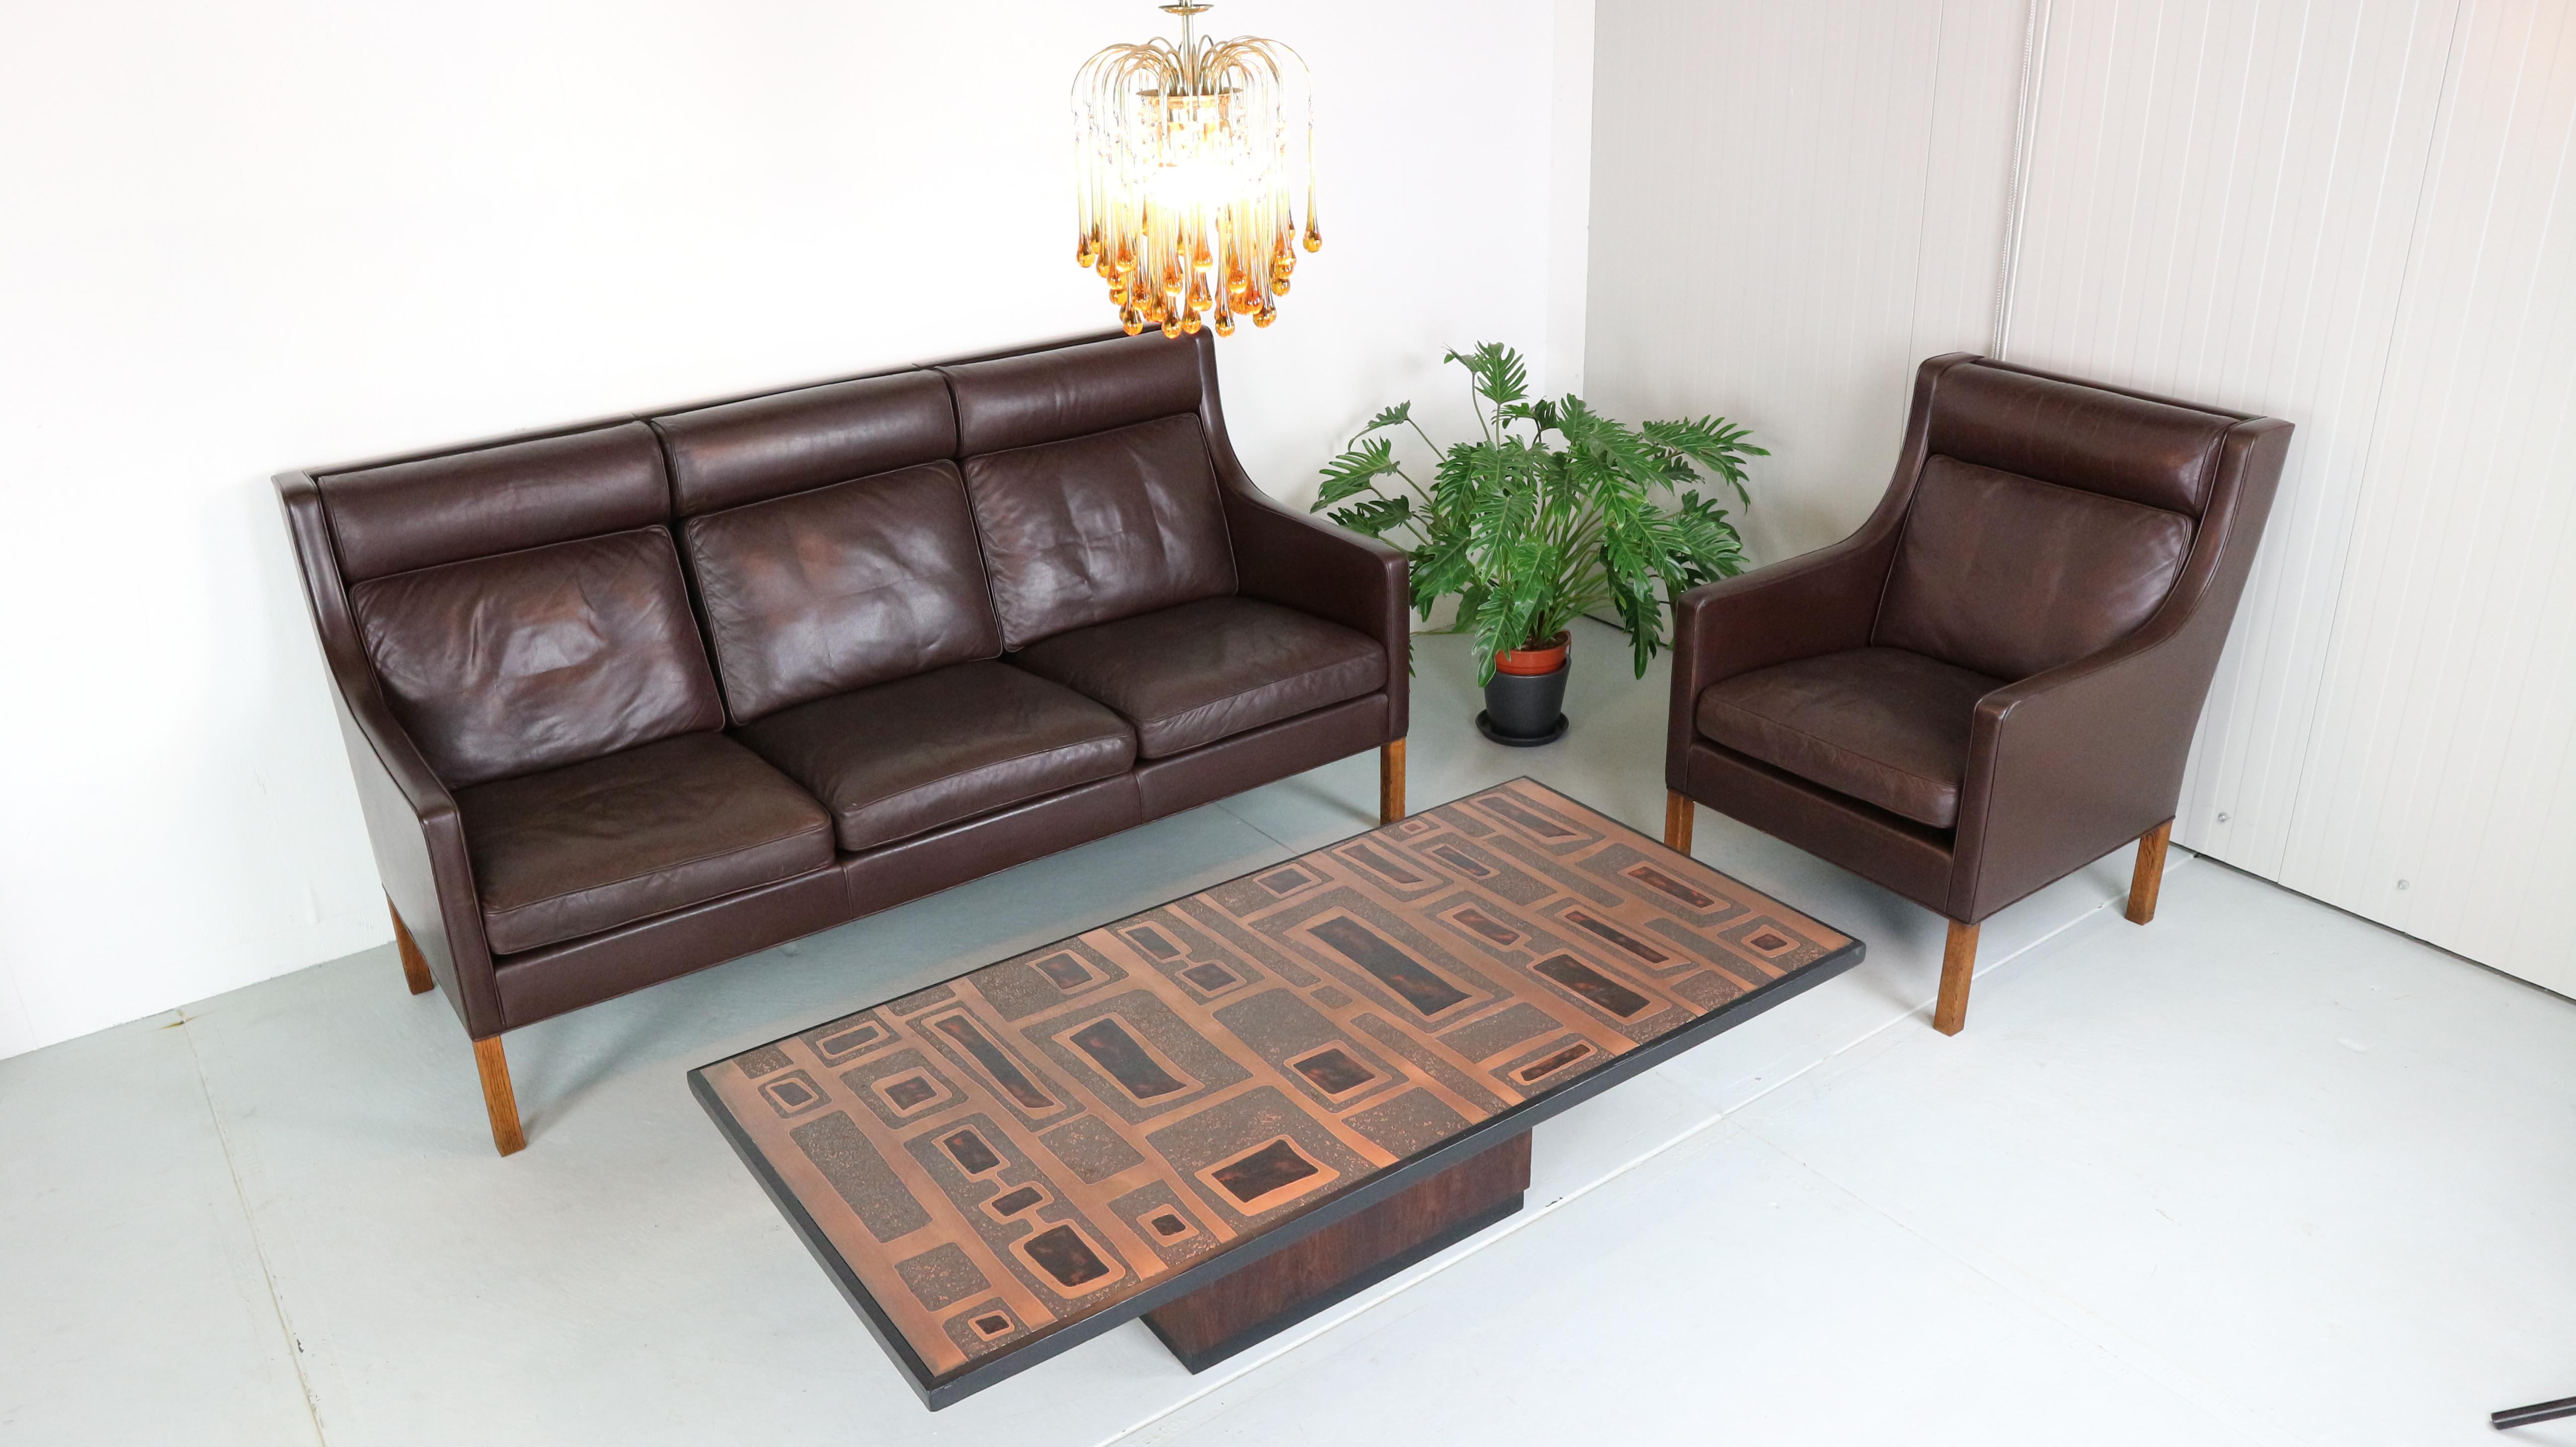 2433 model deep-brown three-seat leather sofa on the solid oak legs and 2432 model wingback chair was designed by Børge Mogensen in the 1960s. The set was made in the 1970s by Fredericia Furniture in Denmark and is very comfortable, remaining in a